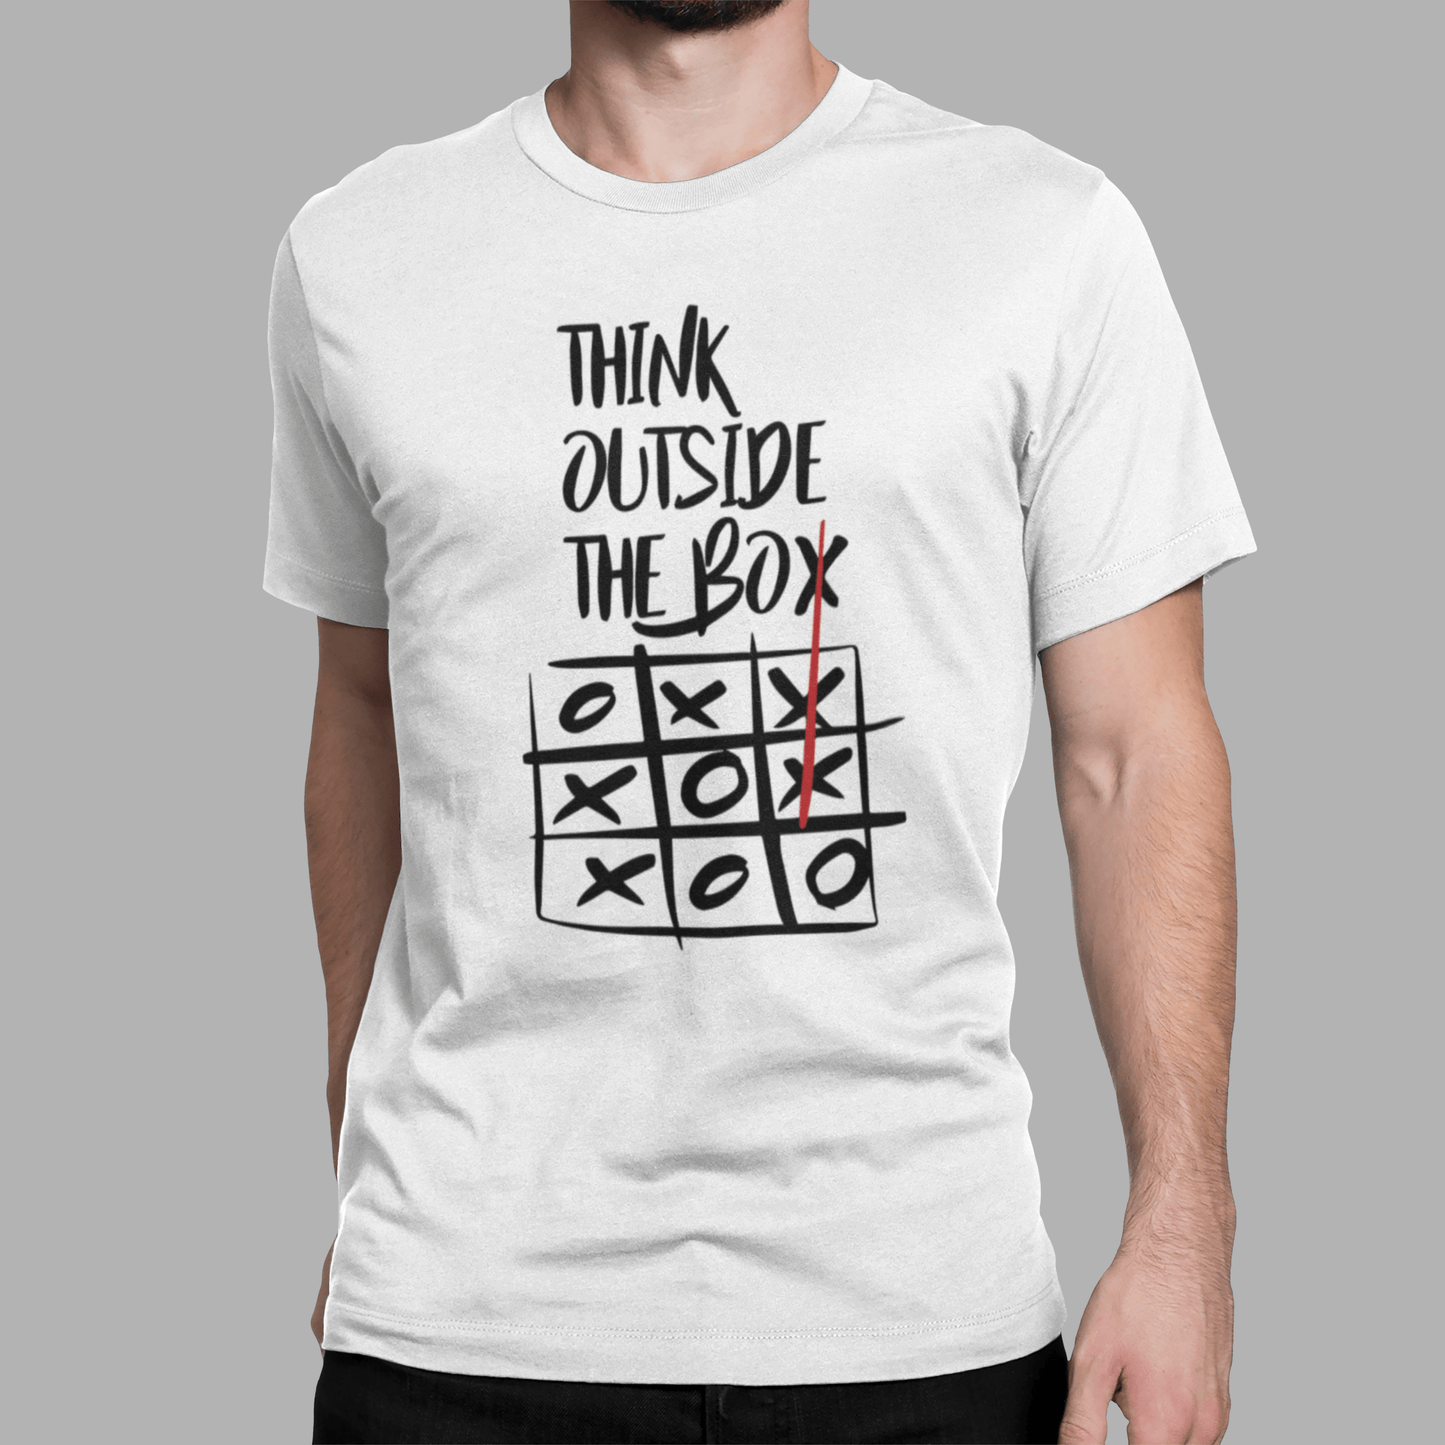 Ultrabasic - Homme T-Shirt Graphique Think Outside The Box Blanc